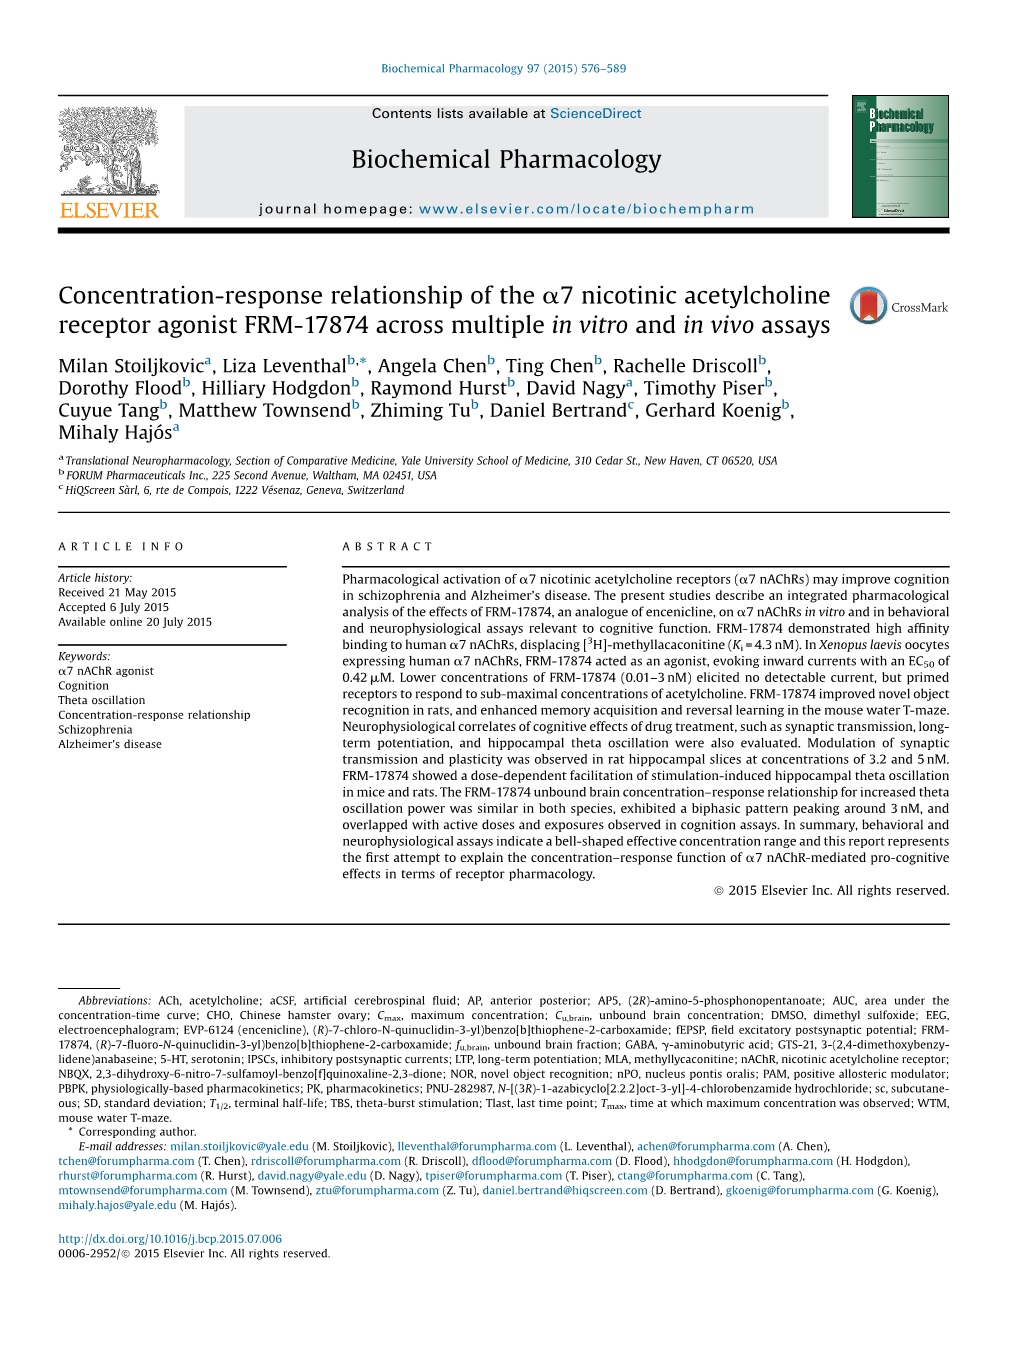 Concentration-Response Relationship of the Α7 Nicotinic Acetylcholine